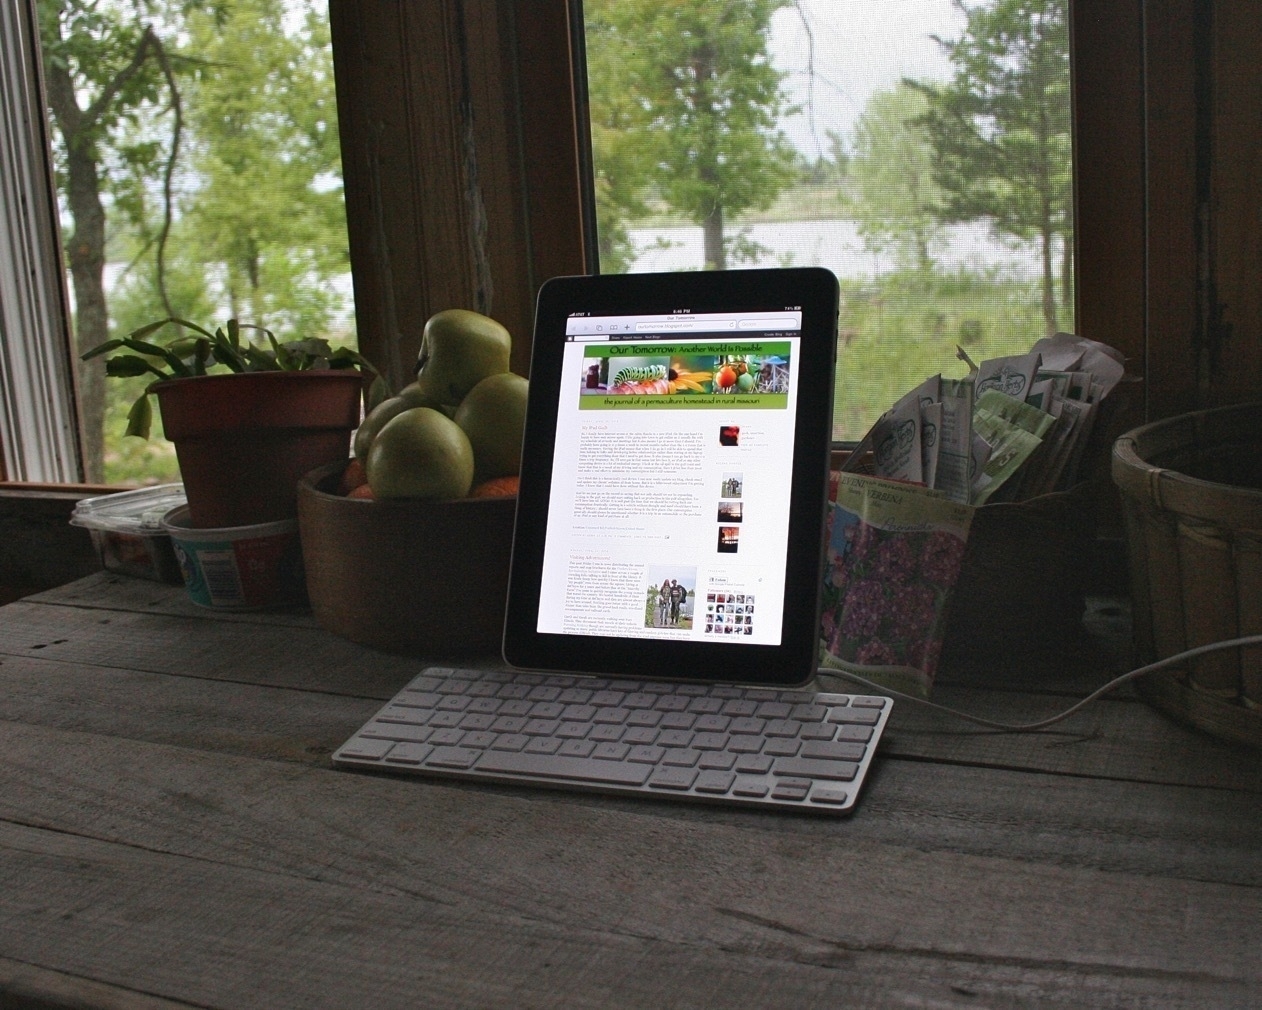 A first generation iPad is docked to the Apple Keyboard Dock for iPad. It's sitting on a wood plank table in front of a bowl of apples and near a window showing a view of trees and grass in the near distance.